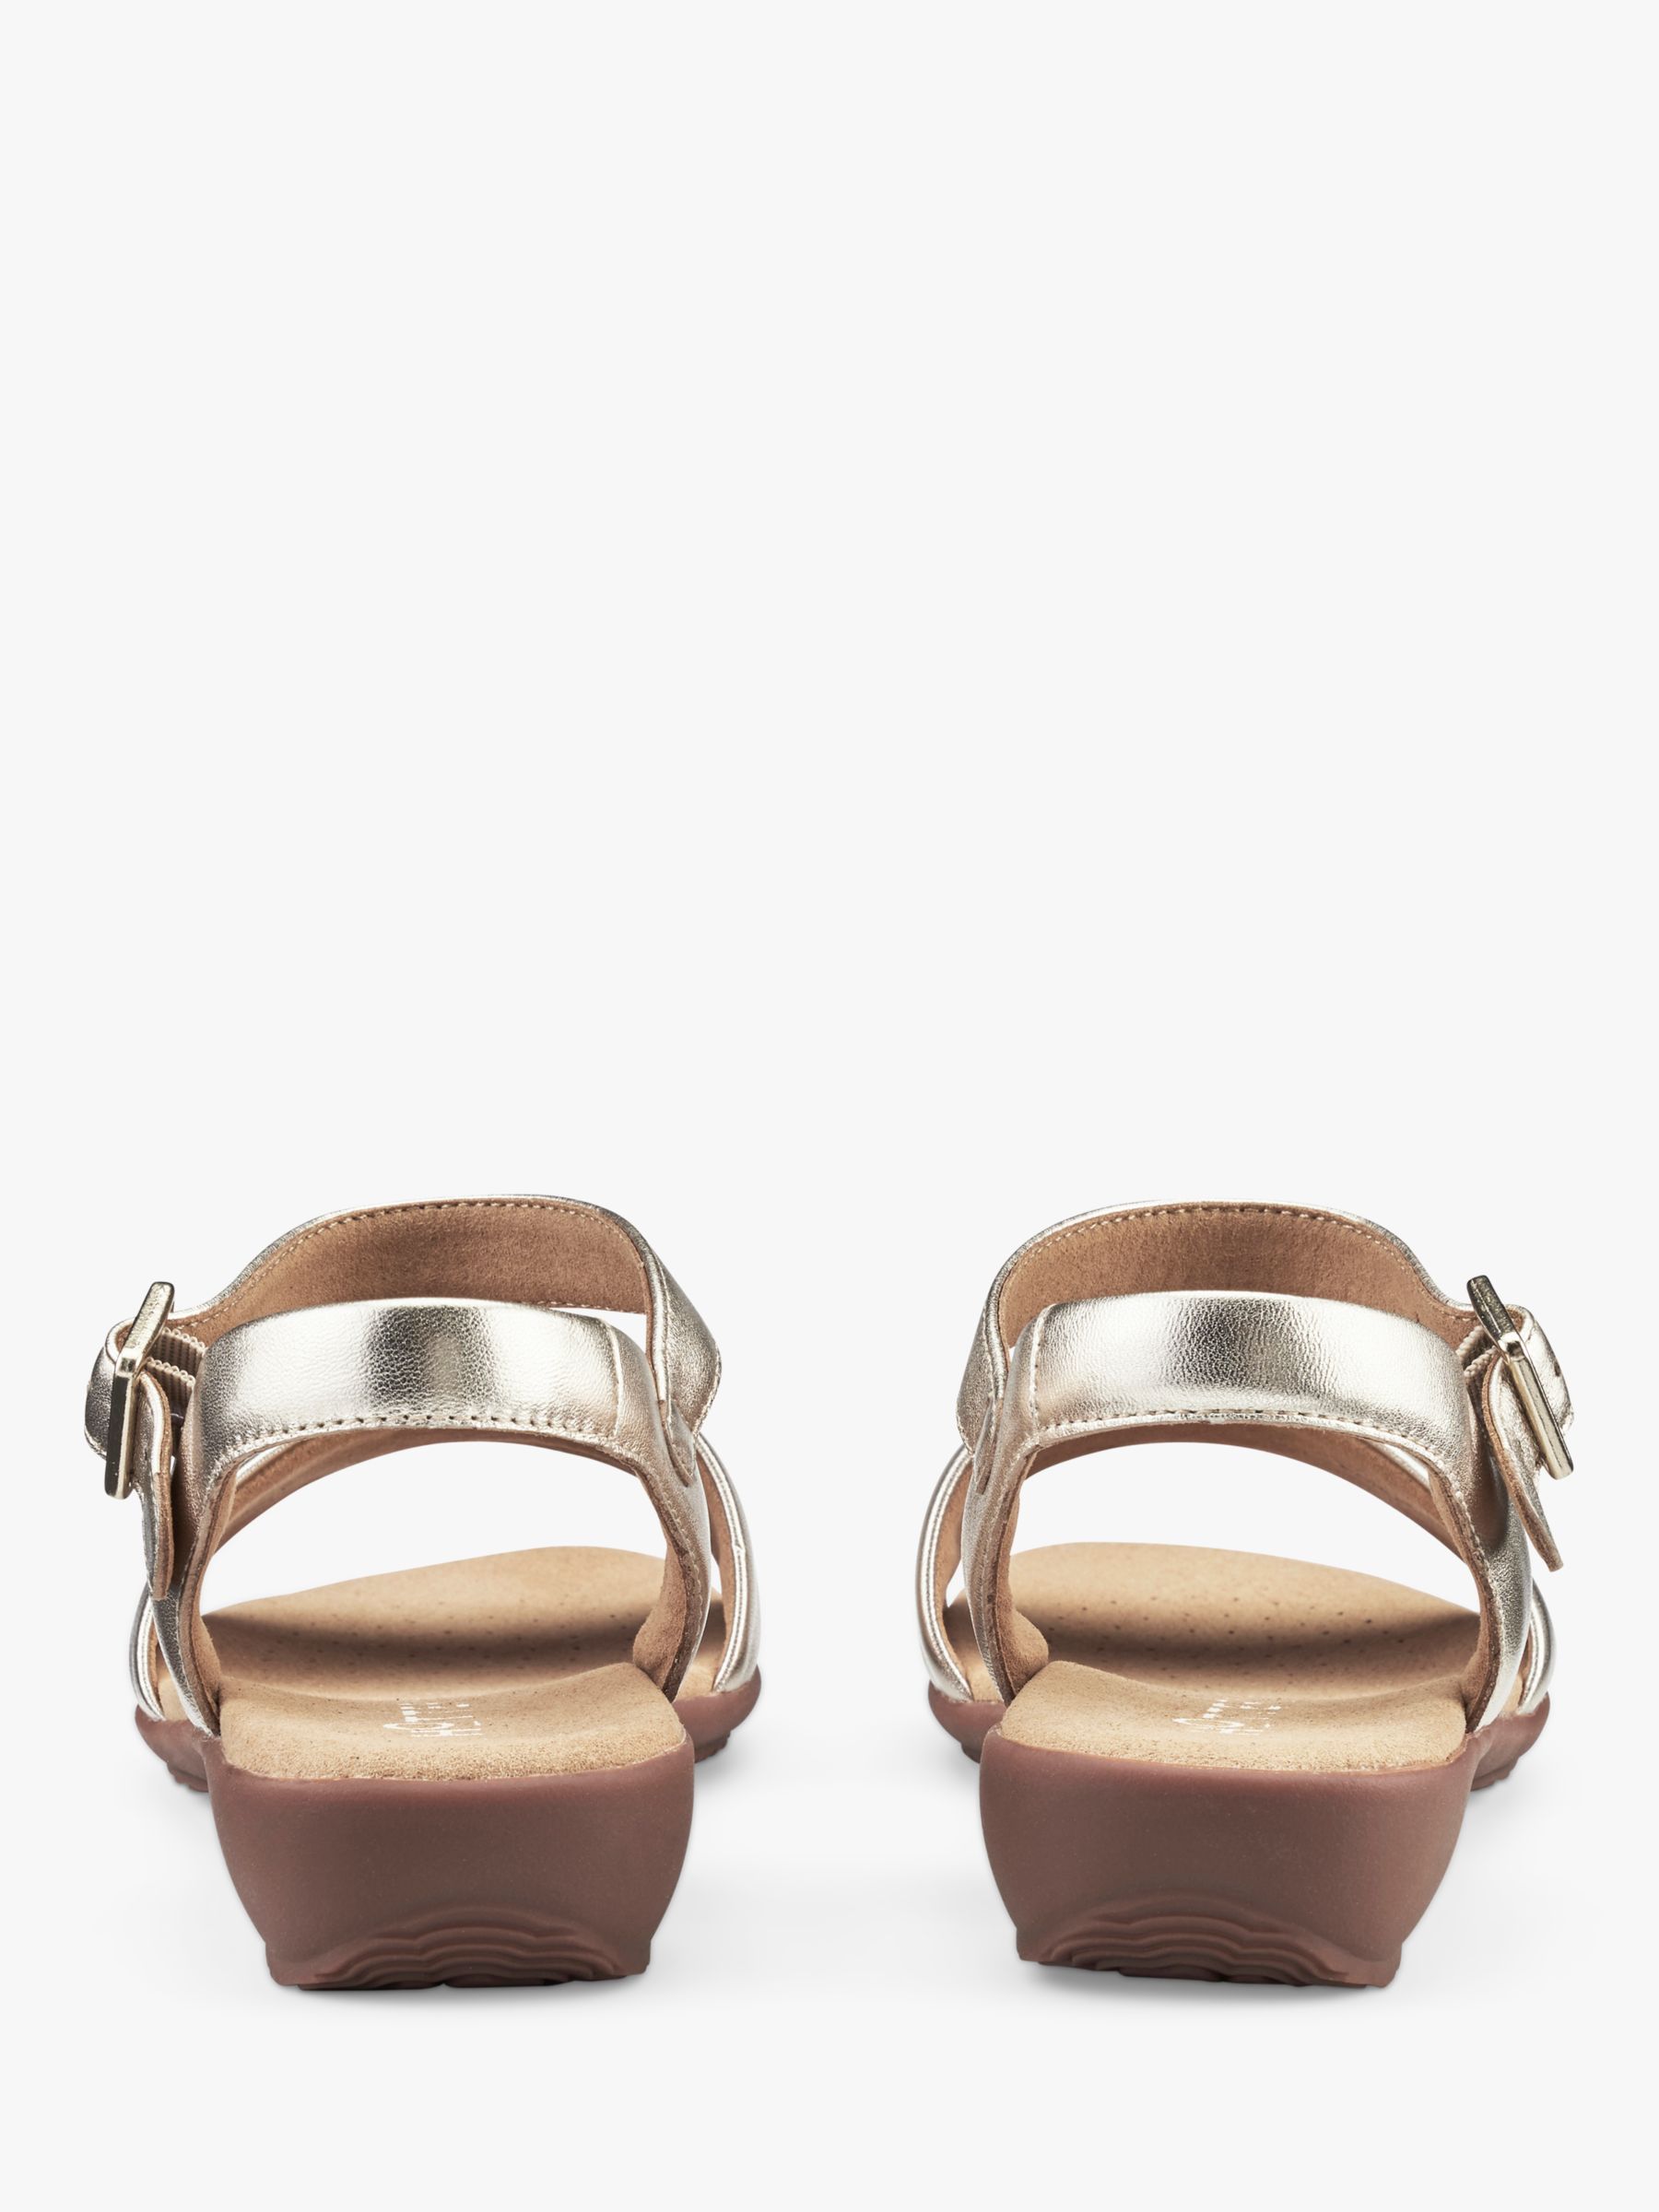 Buy Hotter Tropic Wide Fit Classic Leather Sandals Online at johnlewis.com